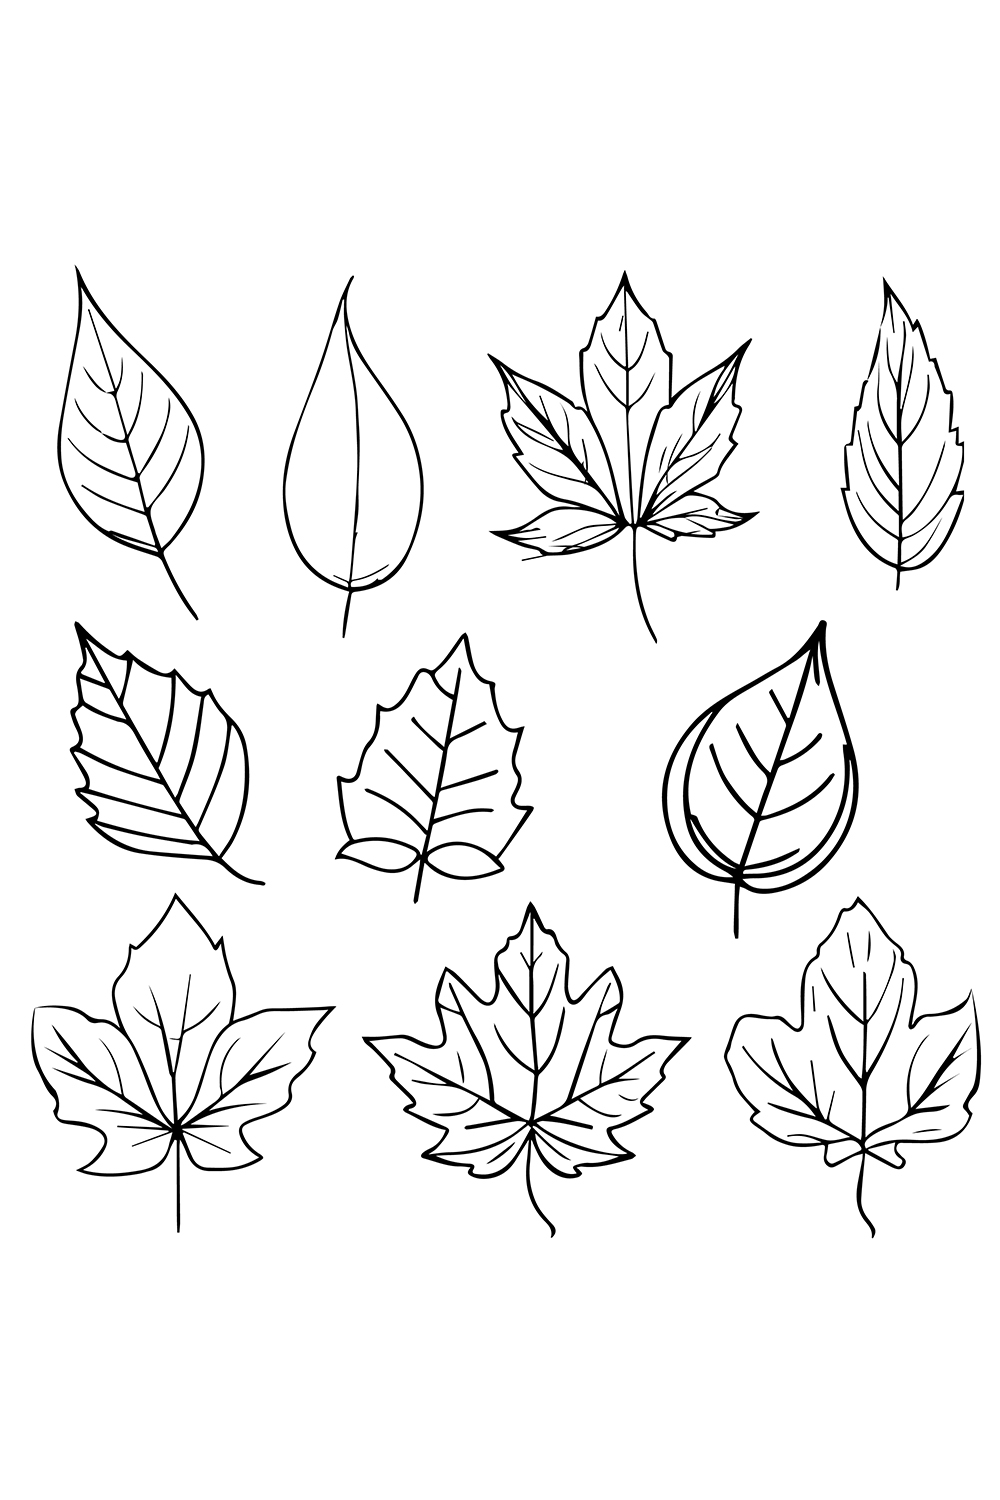 Set of autumn leaf coloring sheets, autumn falling leaf line drawings, hand drawing leaves line art, pinterest preview image.